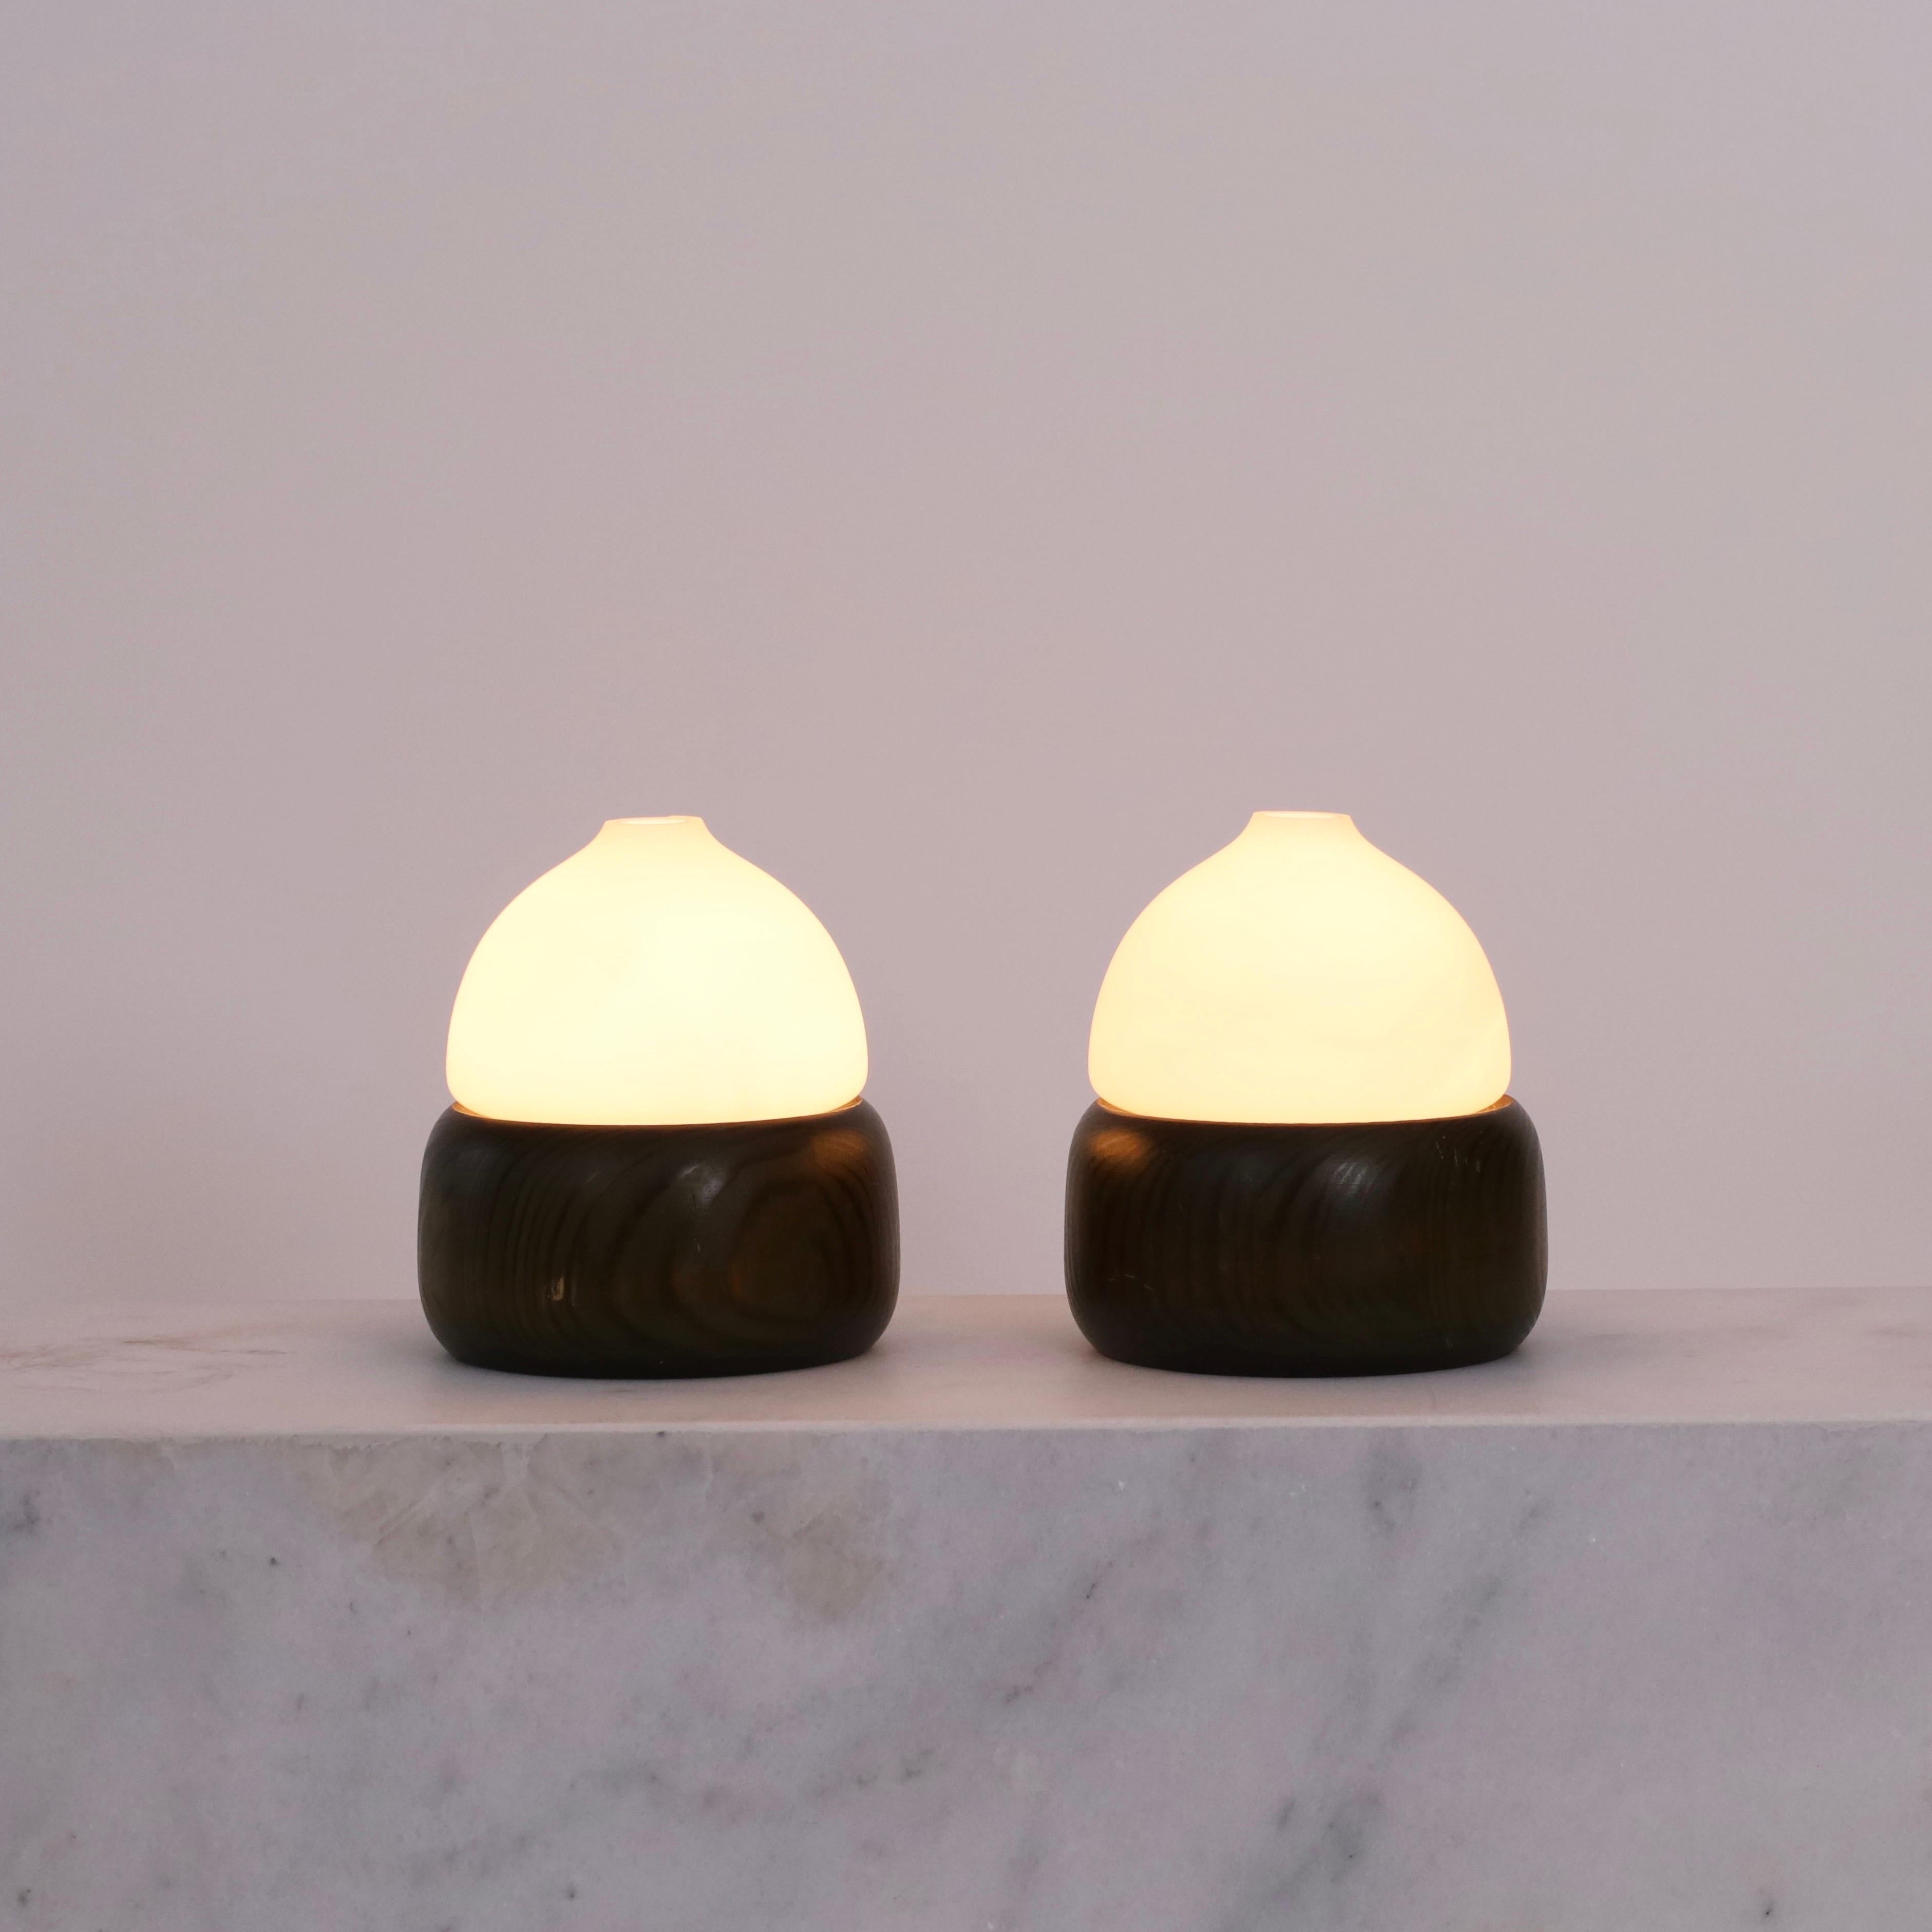 Set of Swedish Pine Wood Night Lamps by Aneta, Sweden, 1970s For Sale 6